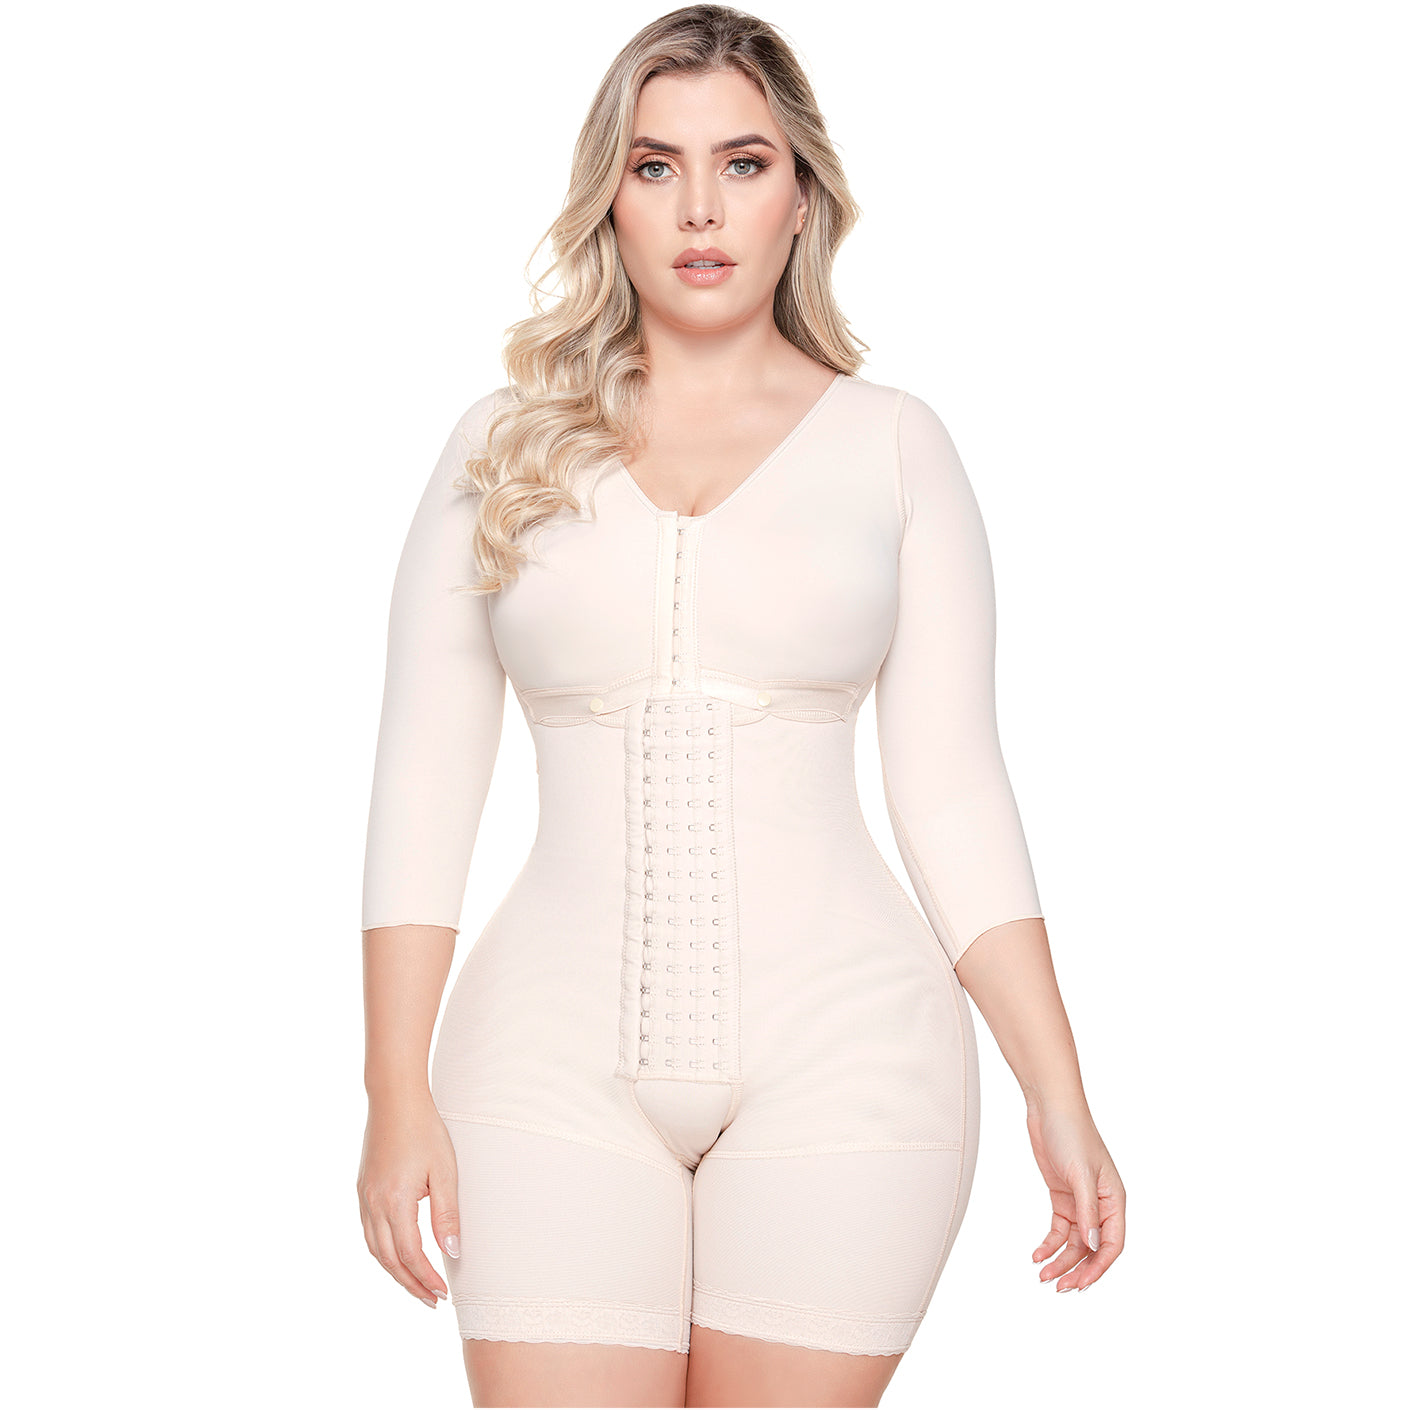 Premium Colombian Shapewear Fajas Colombianas Mujer para Bajar de Peso Body  Suit for women Moderate Compression Flat seams prevent chafing sculpt